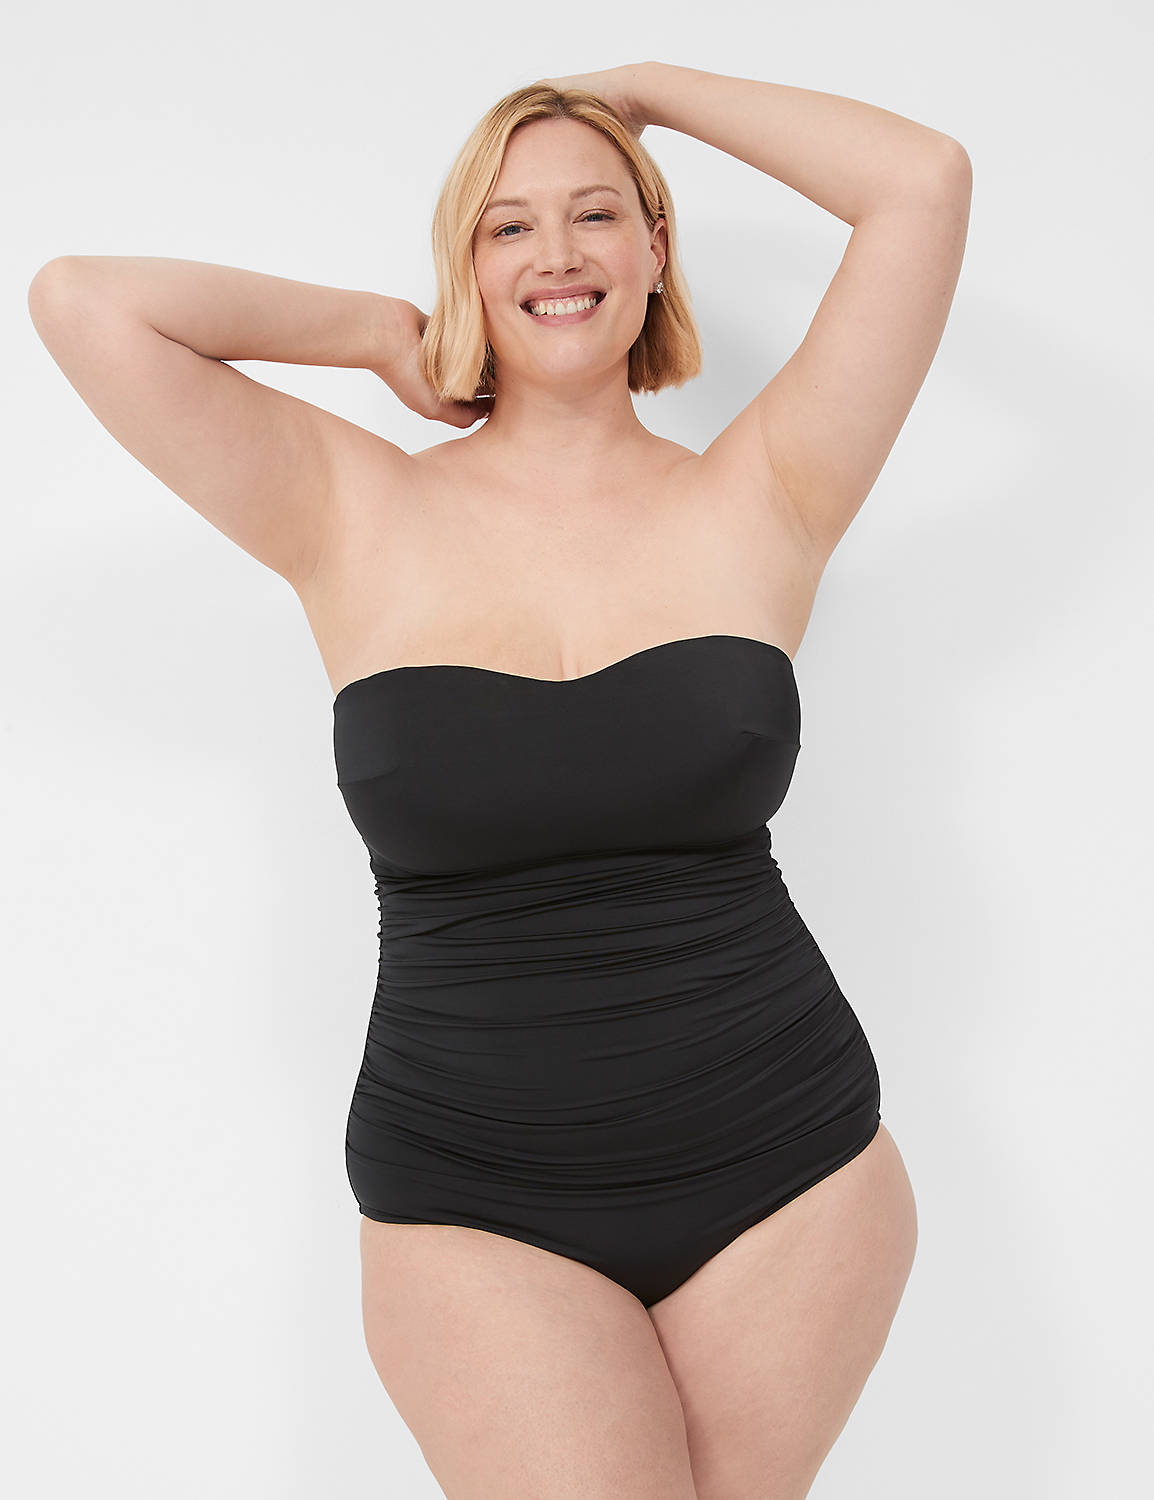 Strapless NW Brief One Piece 114051 Product Image 1